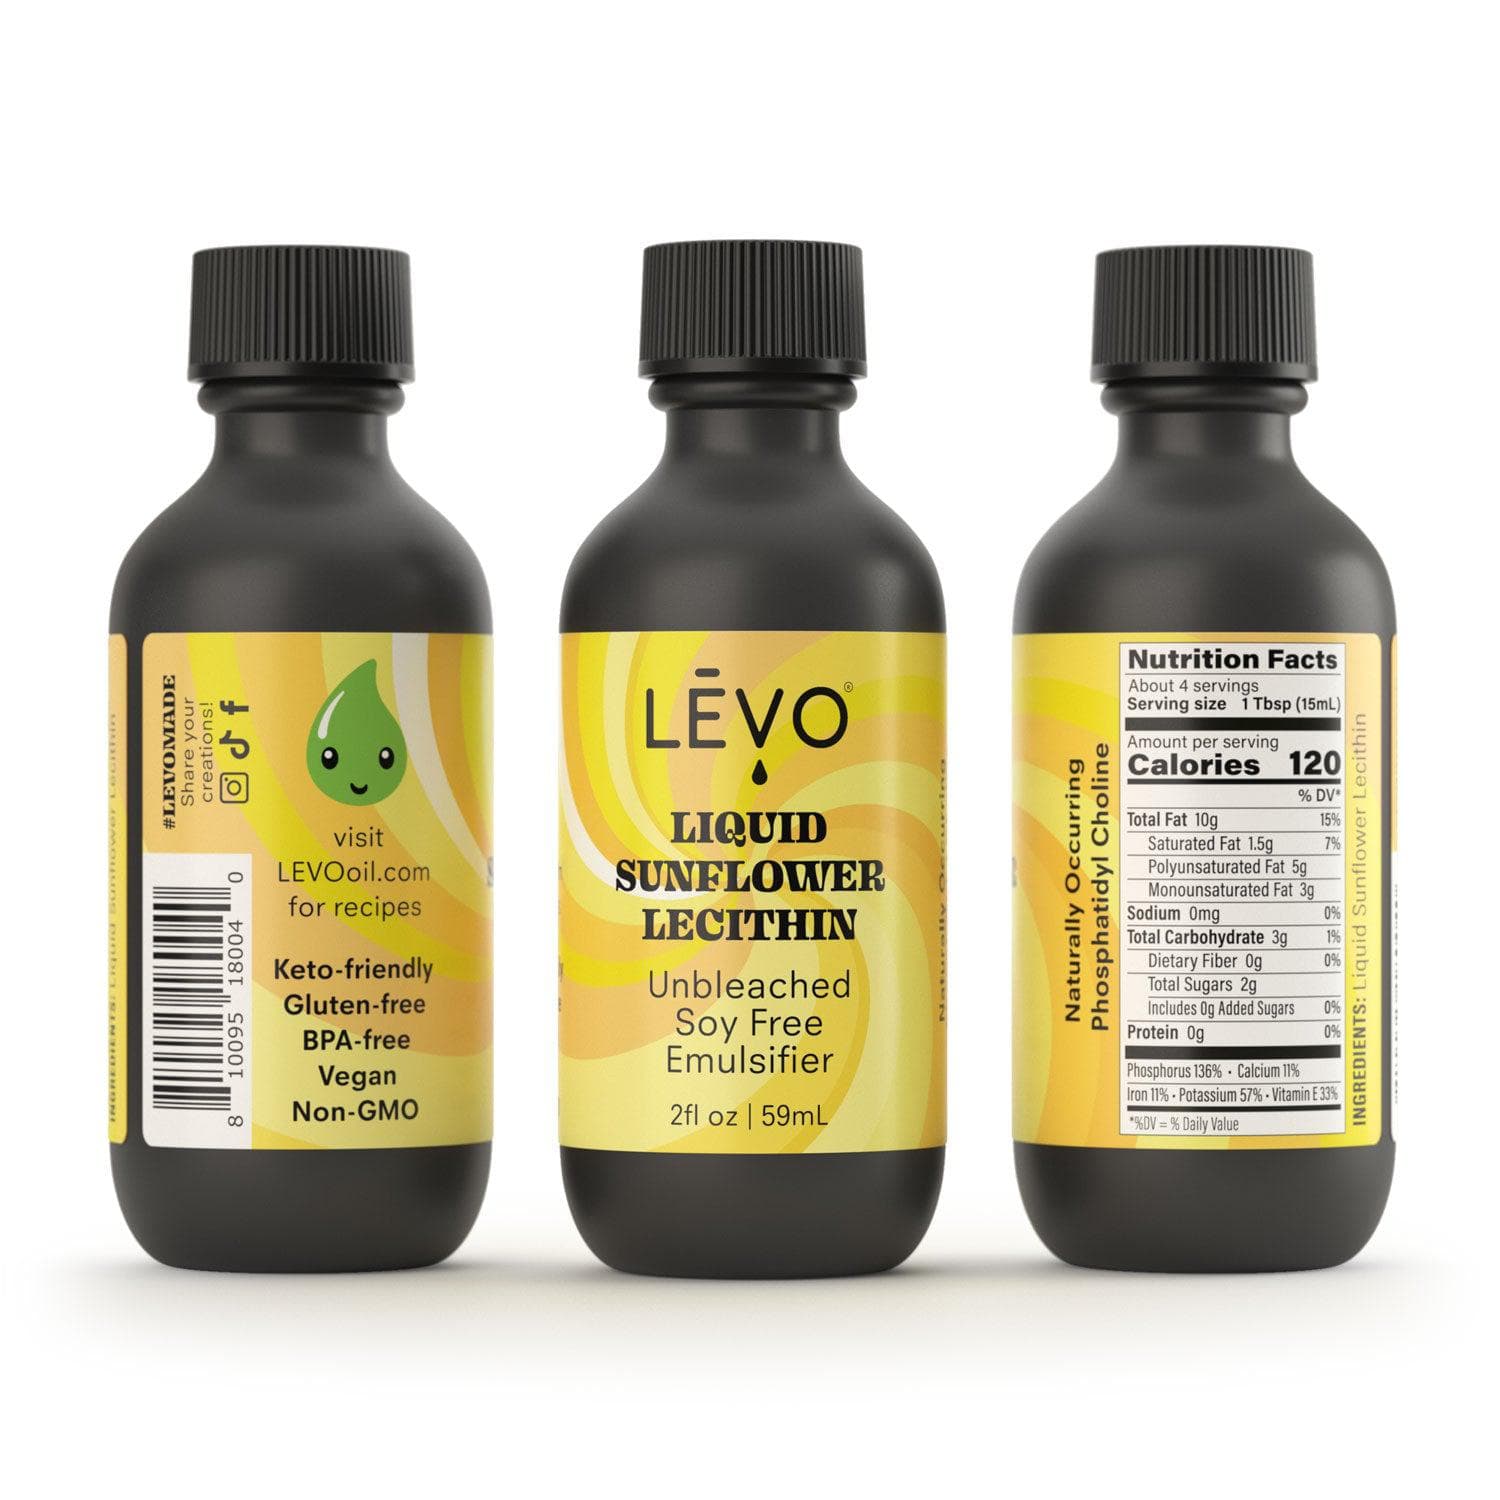 LEVO Lecithin works when making chocolates or baked goods because it binds the infused oil to your water-based ingredients.